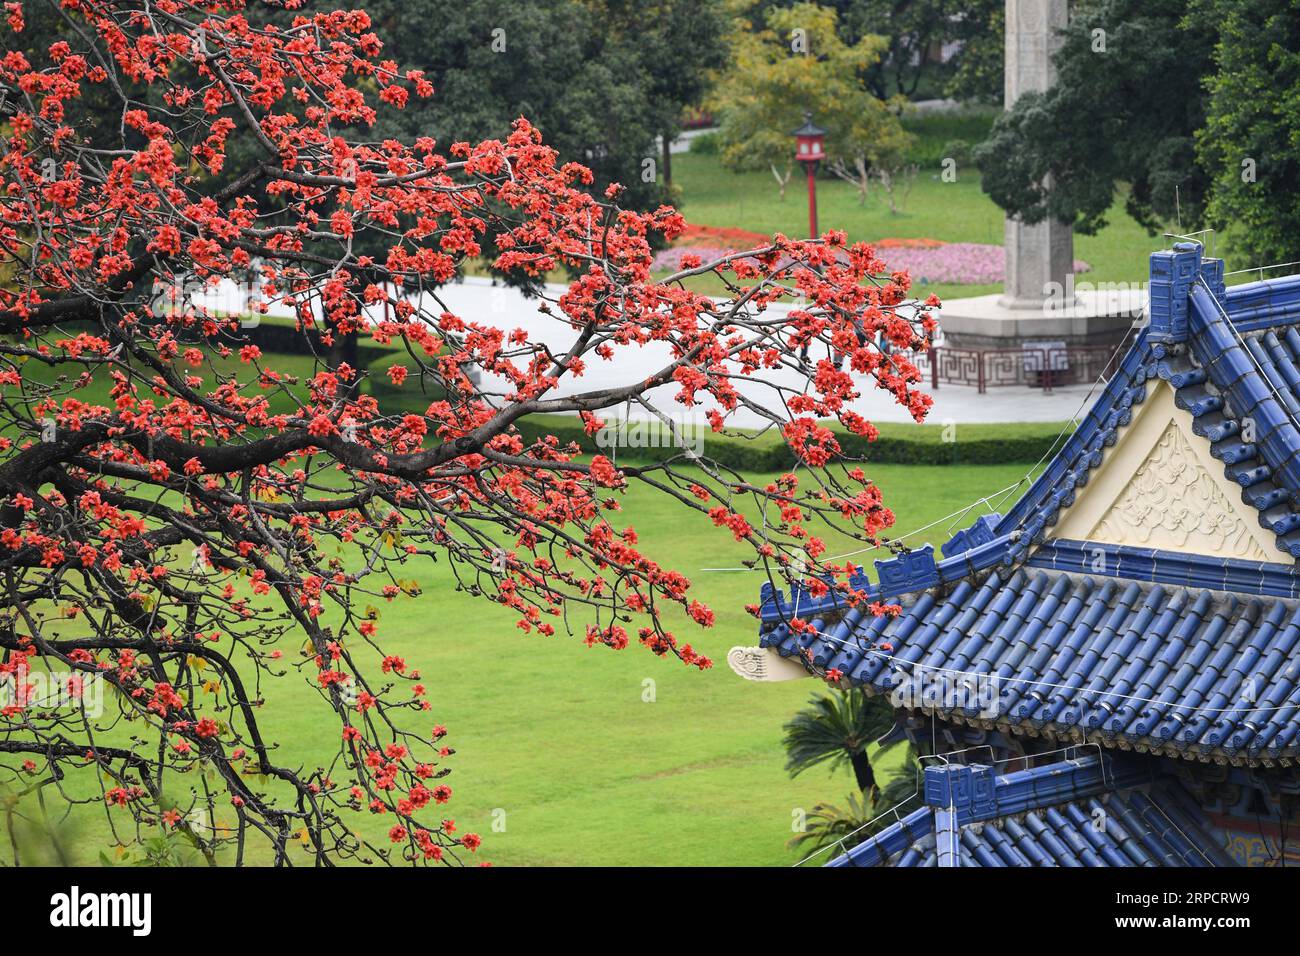 (190712) -- BEIJING, July 12, 2019 -- Photo taken on Feb. 24, 2019 shows kapok flowers at Sun Yat-sen Memorial Hall in Guangzhou, capital of south China s Guangdong Province. Located in south China, Guangdong Province faces the South China Sea and borders Hunan and Jiangxi provinces to the north. It boasts the well-known Pearl River Delta, which is composed of three upstream rivers and a large number of islands. Due to the climate, Guangdong is famous for a diversified ecological system and environment. In recent years, by upholding the principle of green development, Guangdong has made remark Stock Photo